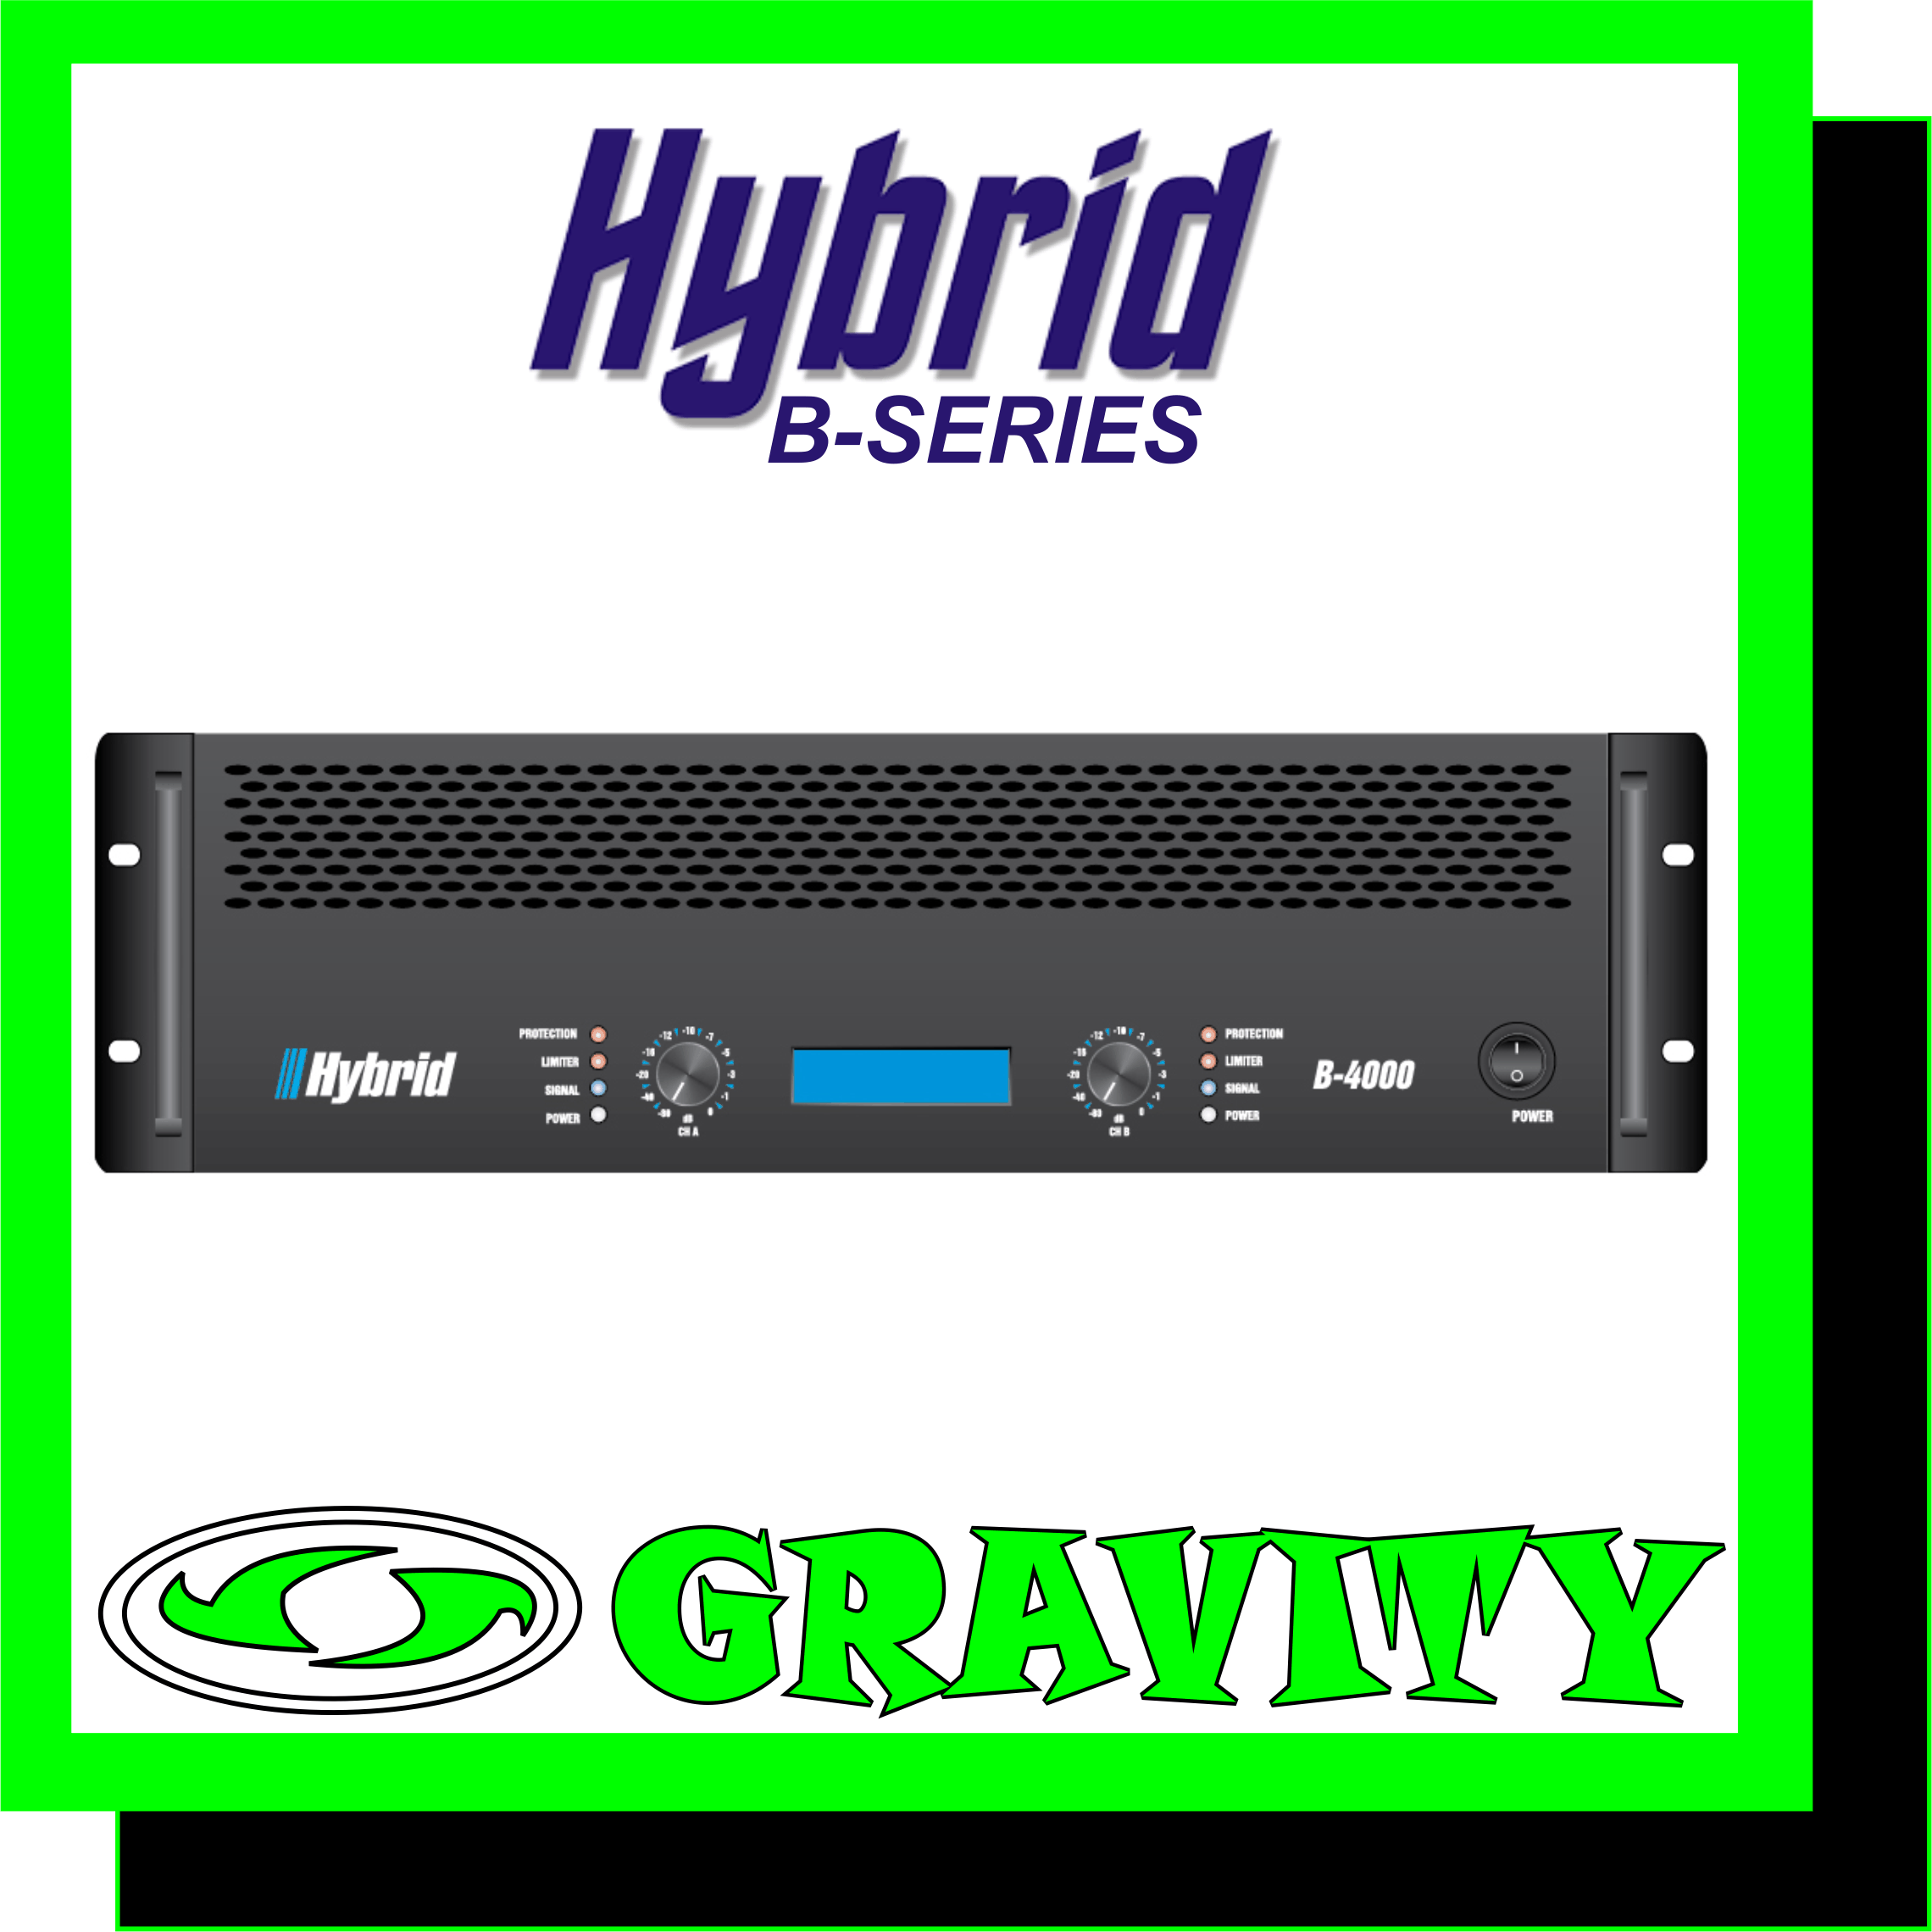 Hybrid B4000MK5 2X2000W Power Amplifier  8Ohm Stereo Power . RMS/CH 1300W 4Ohm Stereo Power . RMS/CH 2000W 8Ohm Bridged Mono Power . RMS 4000W  Frequency Response ( 1W/8O) 20Hz 20KHz +/- 3dB Protection DC Protection . Short Circuit Protection . Thermal Protection . Inrush Current Protection . Soft Start Portection . Input & Overload Protection THD+N (20Hz-20KHz) <0.1% Damping Factor (1KHz @ 8O) >700 Hum & Noise(A weighted . -80dBW) 100dB Input Impedance (Balanced / Unbalanced) 20K Ohm / 10K Ohm Crosstalk (20Hz-20KHz Rated Power 8O) >60dB Cooling 2 x Fans . Dual speed . Front to Rear Airflow  Input Connectors Jack/Female XLR Neutrik Combo + Male XLR Neutrik Output Connectors 3x Neutrik Speakon Dimensions (WxHxD) mm 483 x 132 x 518 Weight Kg 33.5